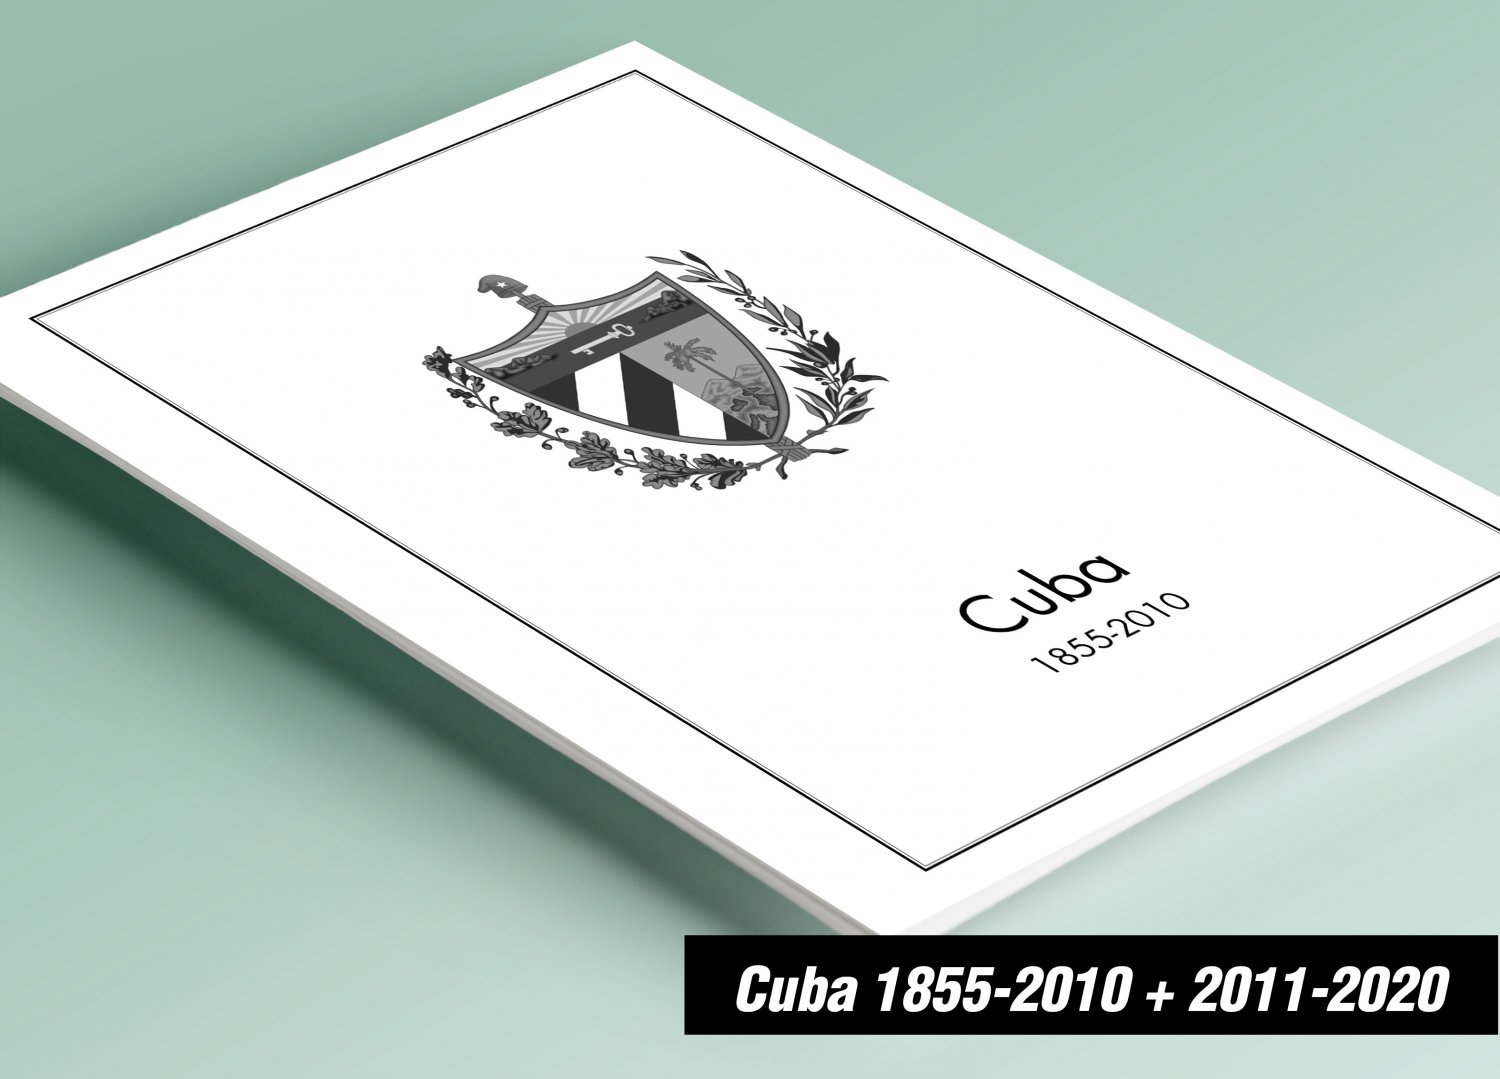 PRINTED CUBA 1855-2010 + 2011-2020 PRINTED STAMP ALBUM PAGES (839 pages)